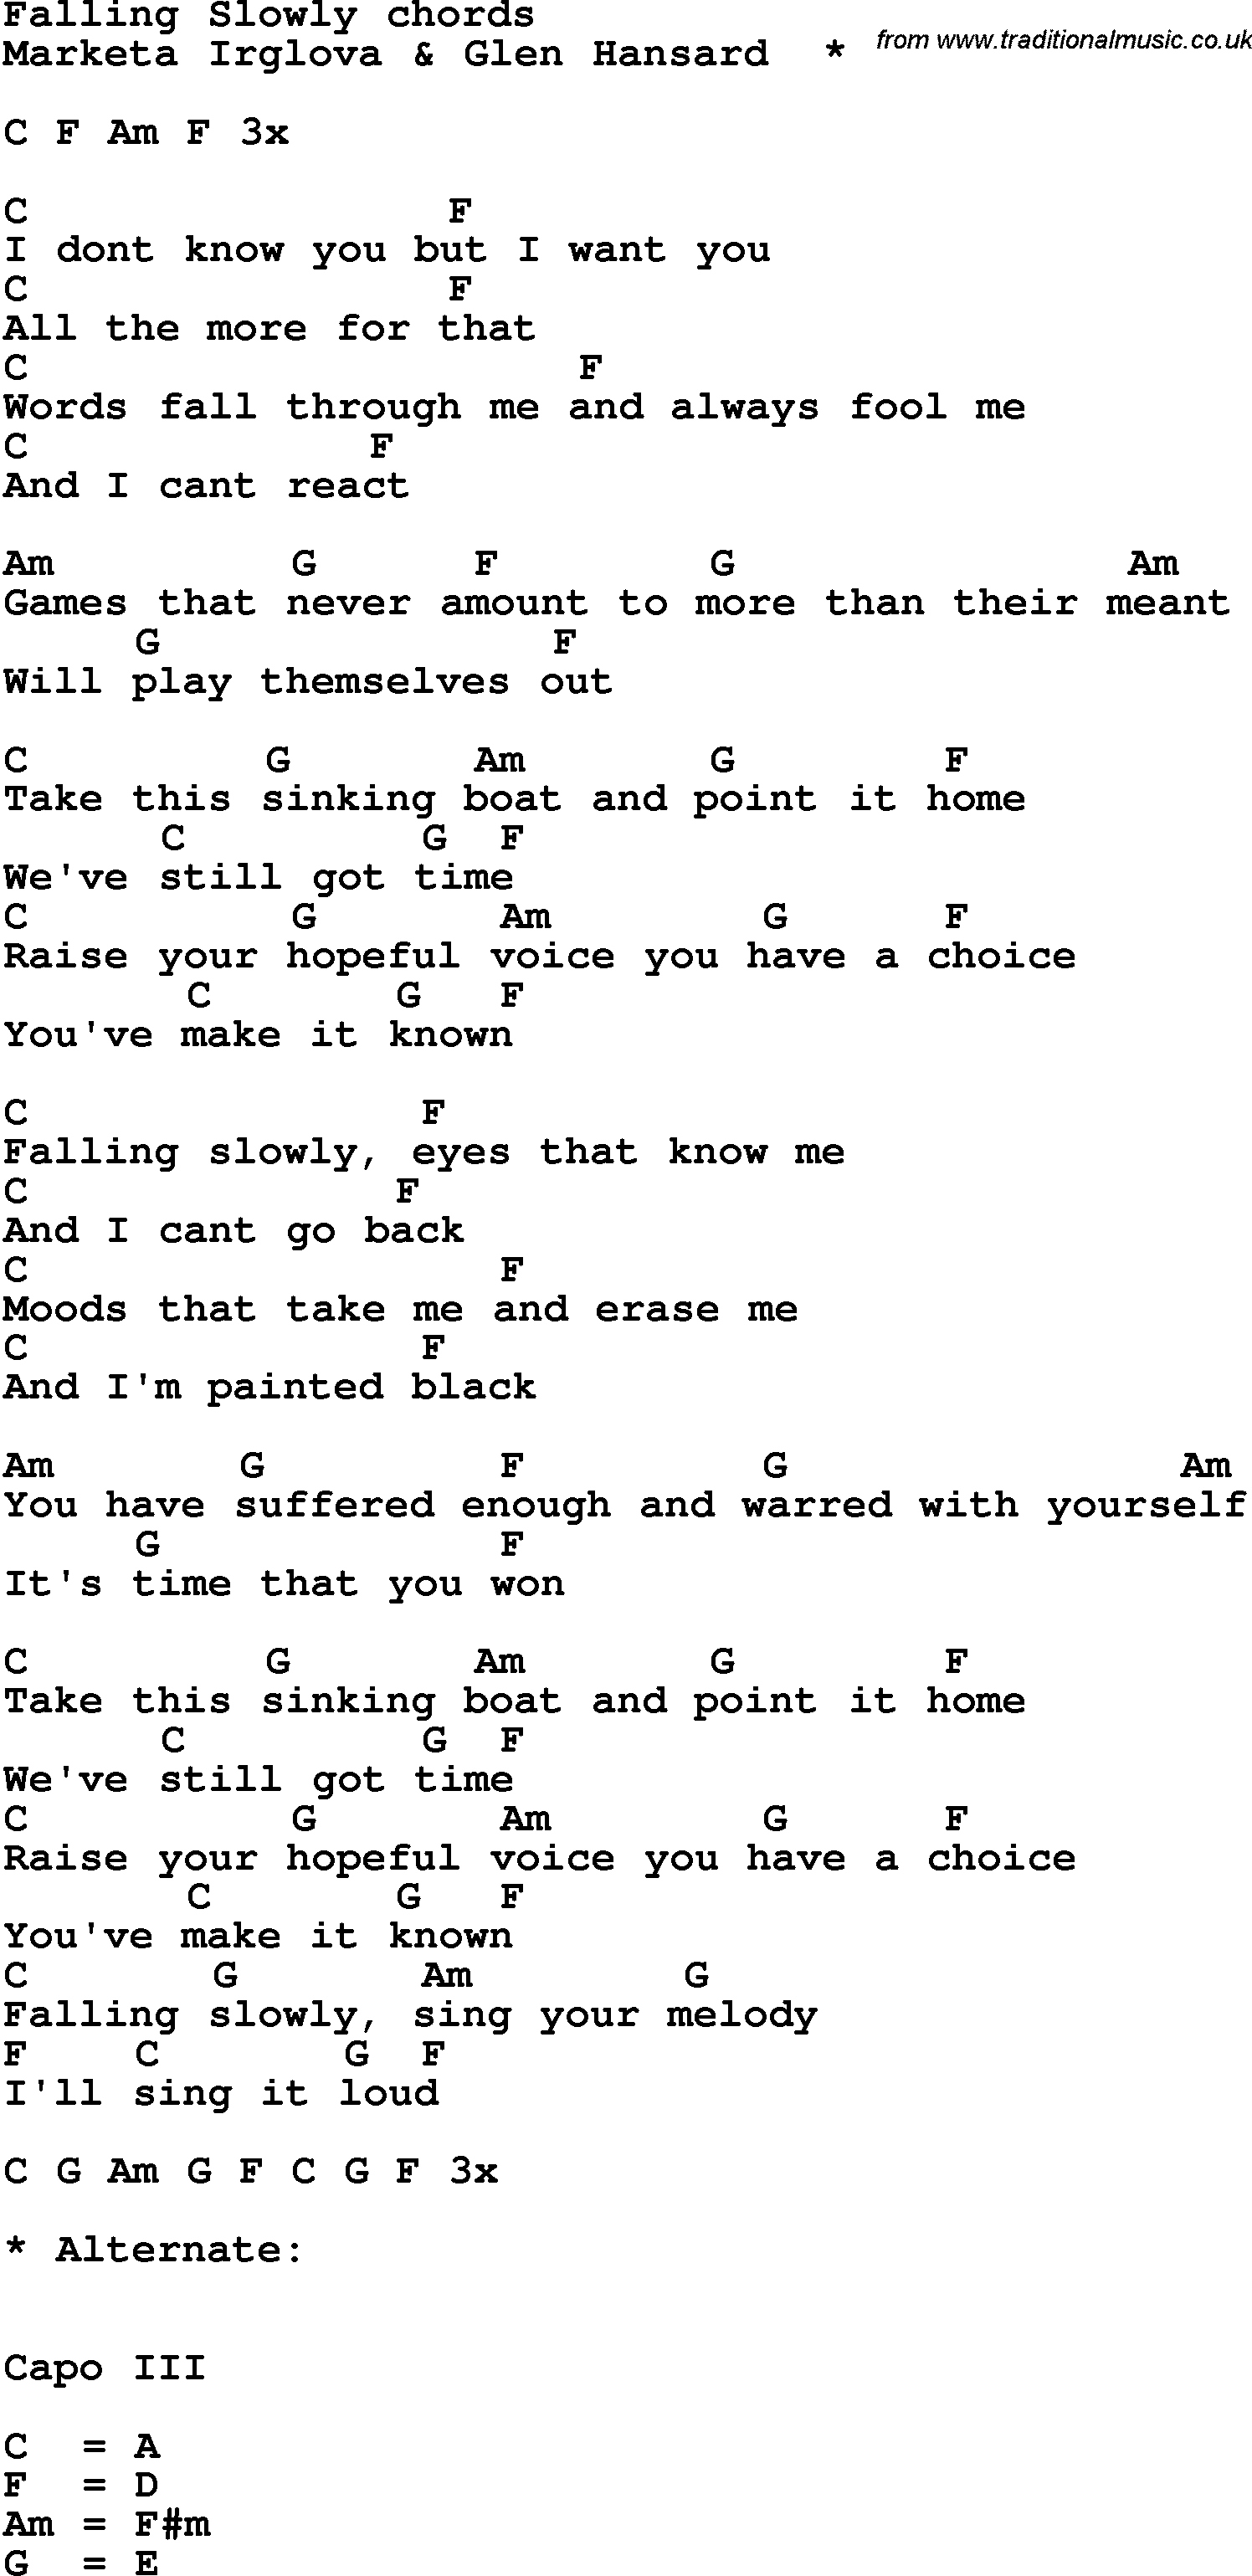 Falling Slowly Chords Song Lyrics With Guitar Chords For Falling Slowly